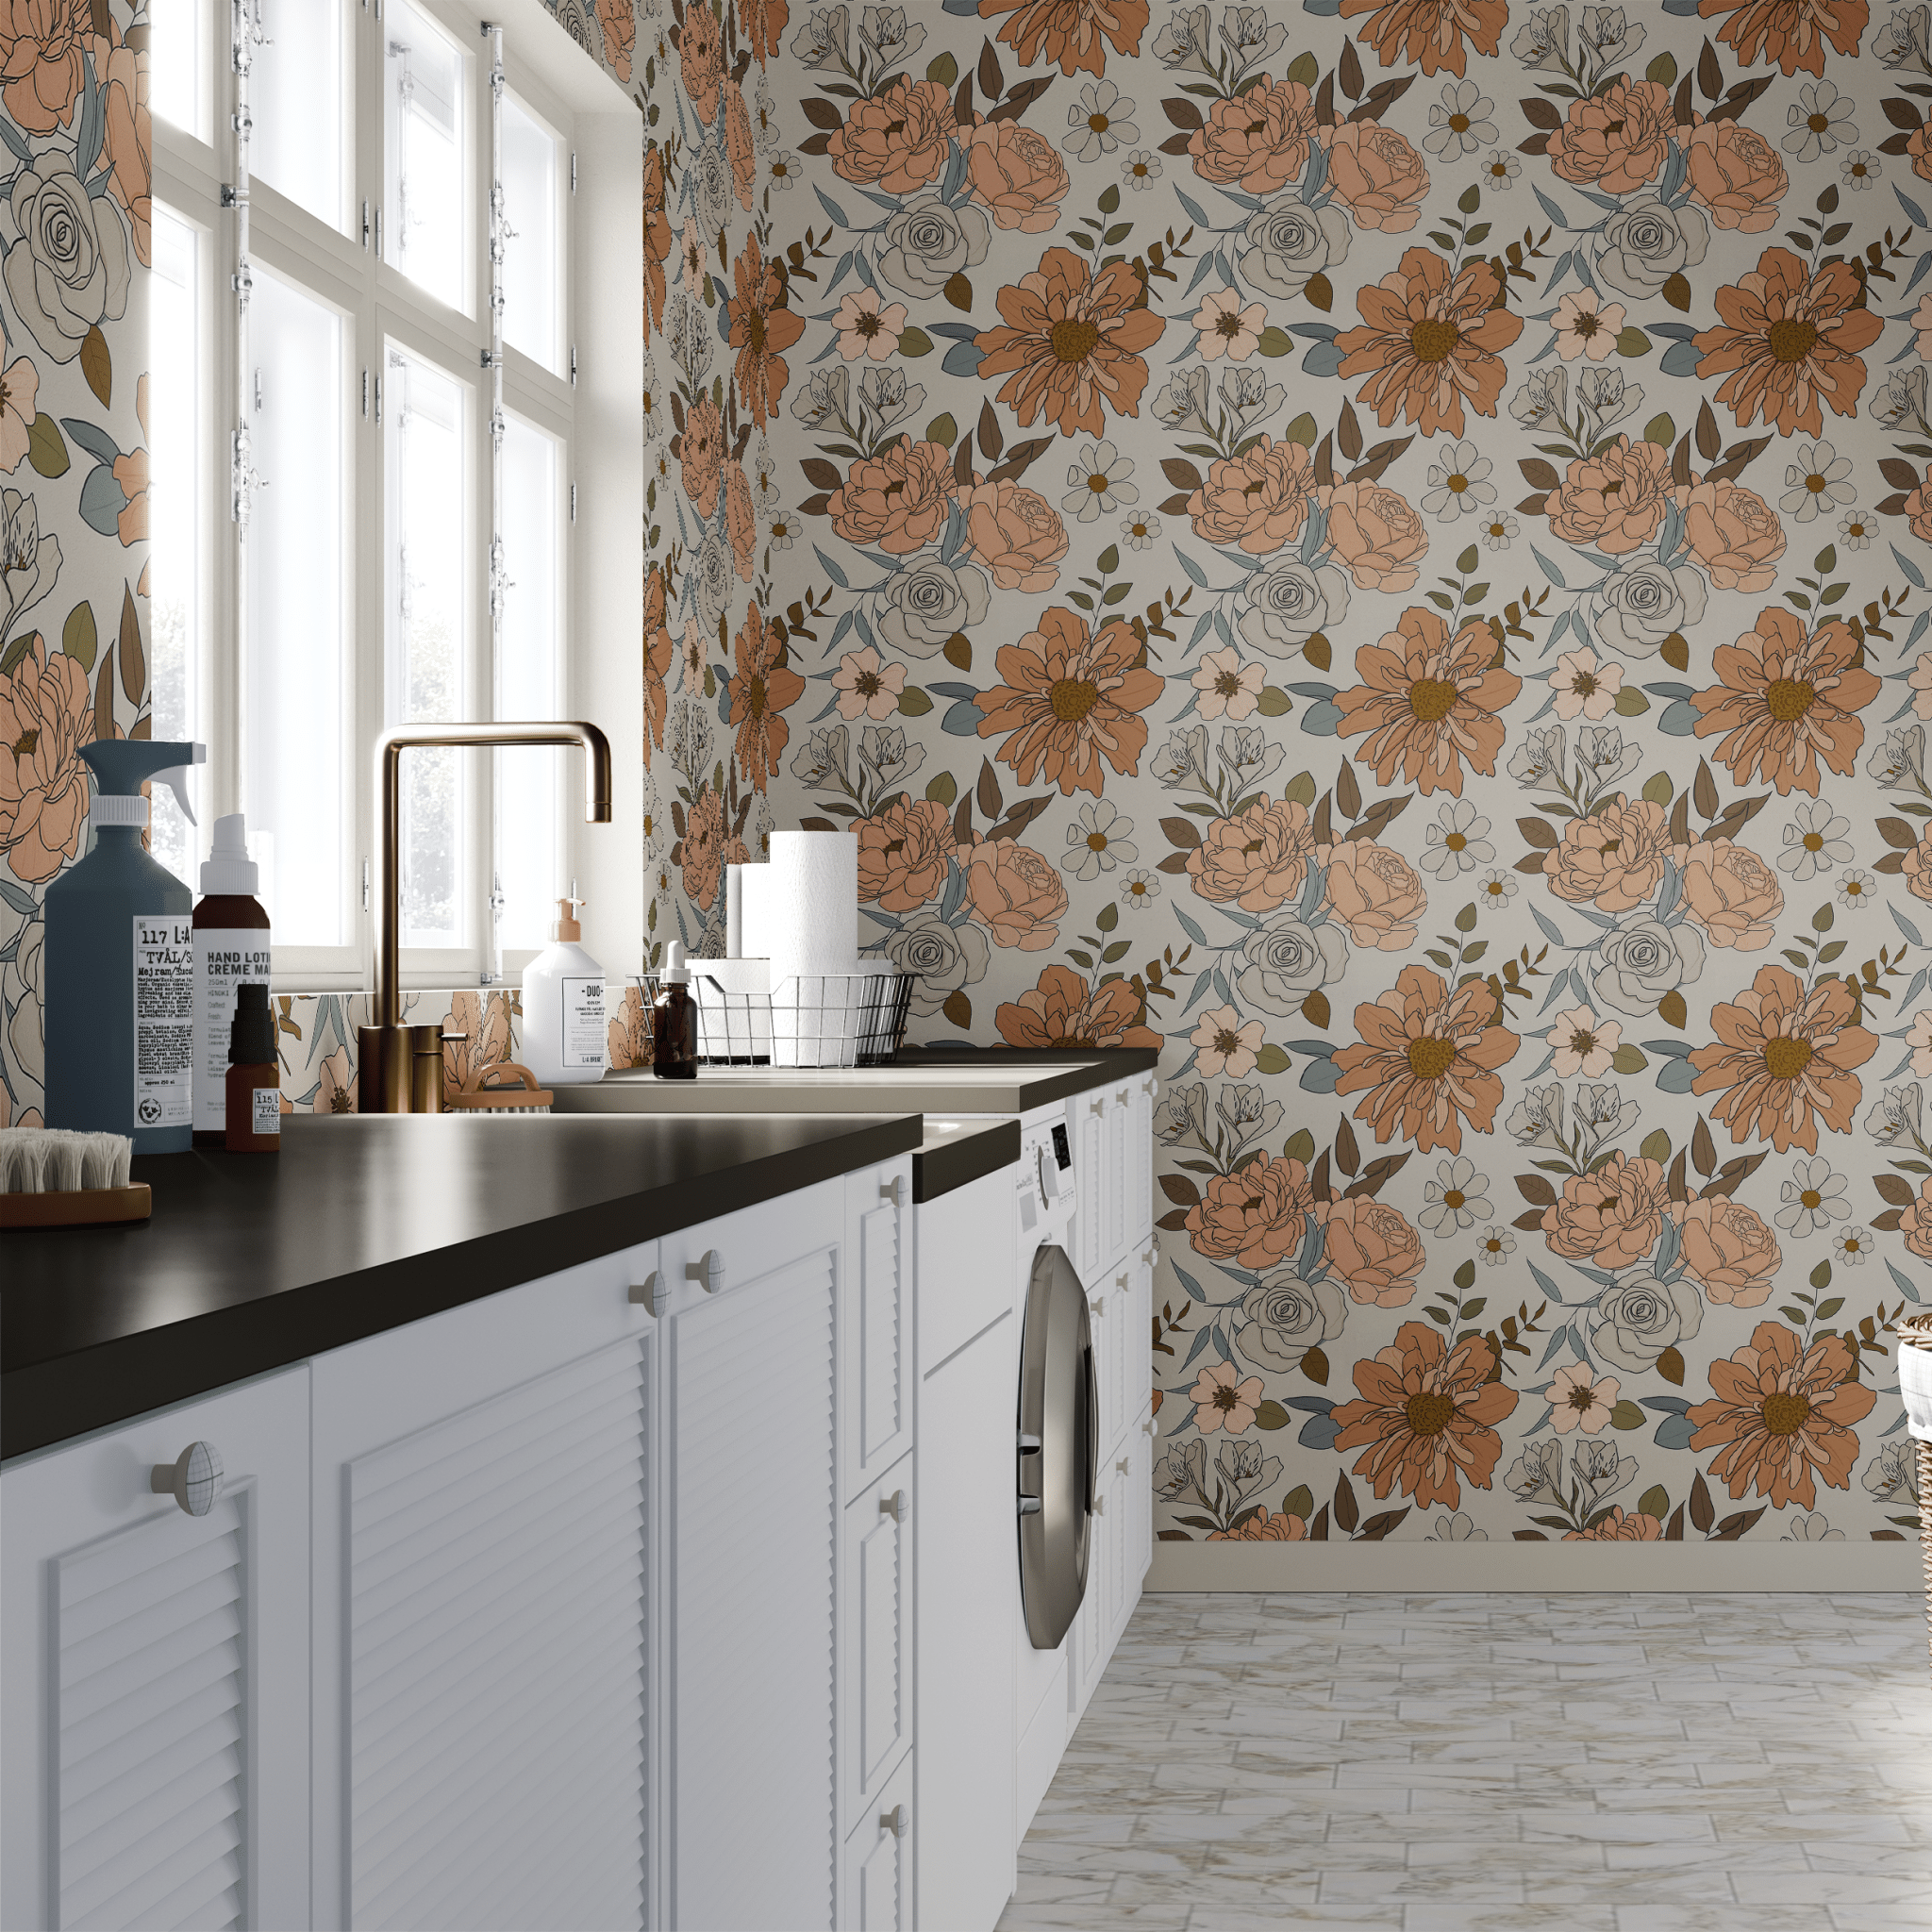 Bohemian style floral wallpaper in orange and blue tones in a clean large laundry room